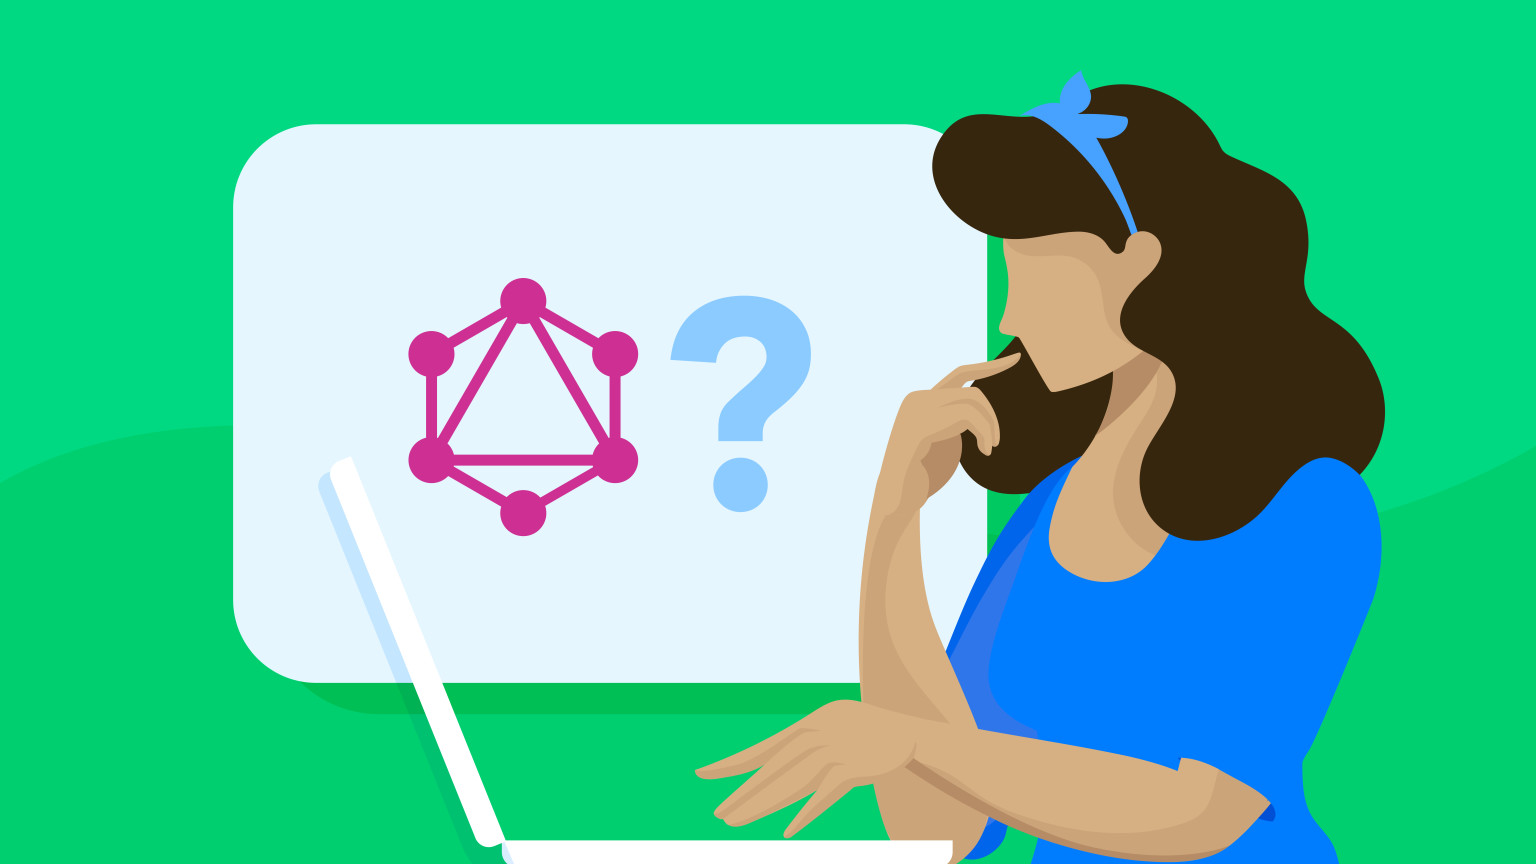 In addition to REST APIs, Contentful offers a GraphQL API to fetch your data in your applications. But what is GraphQL, and how do you use a GraphQL API?